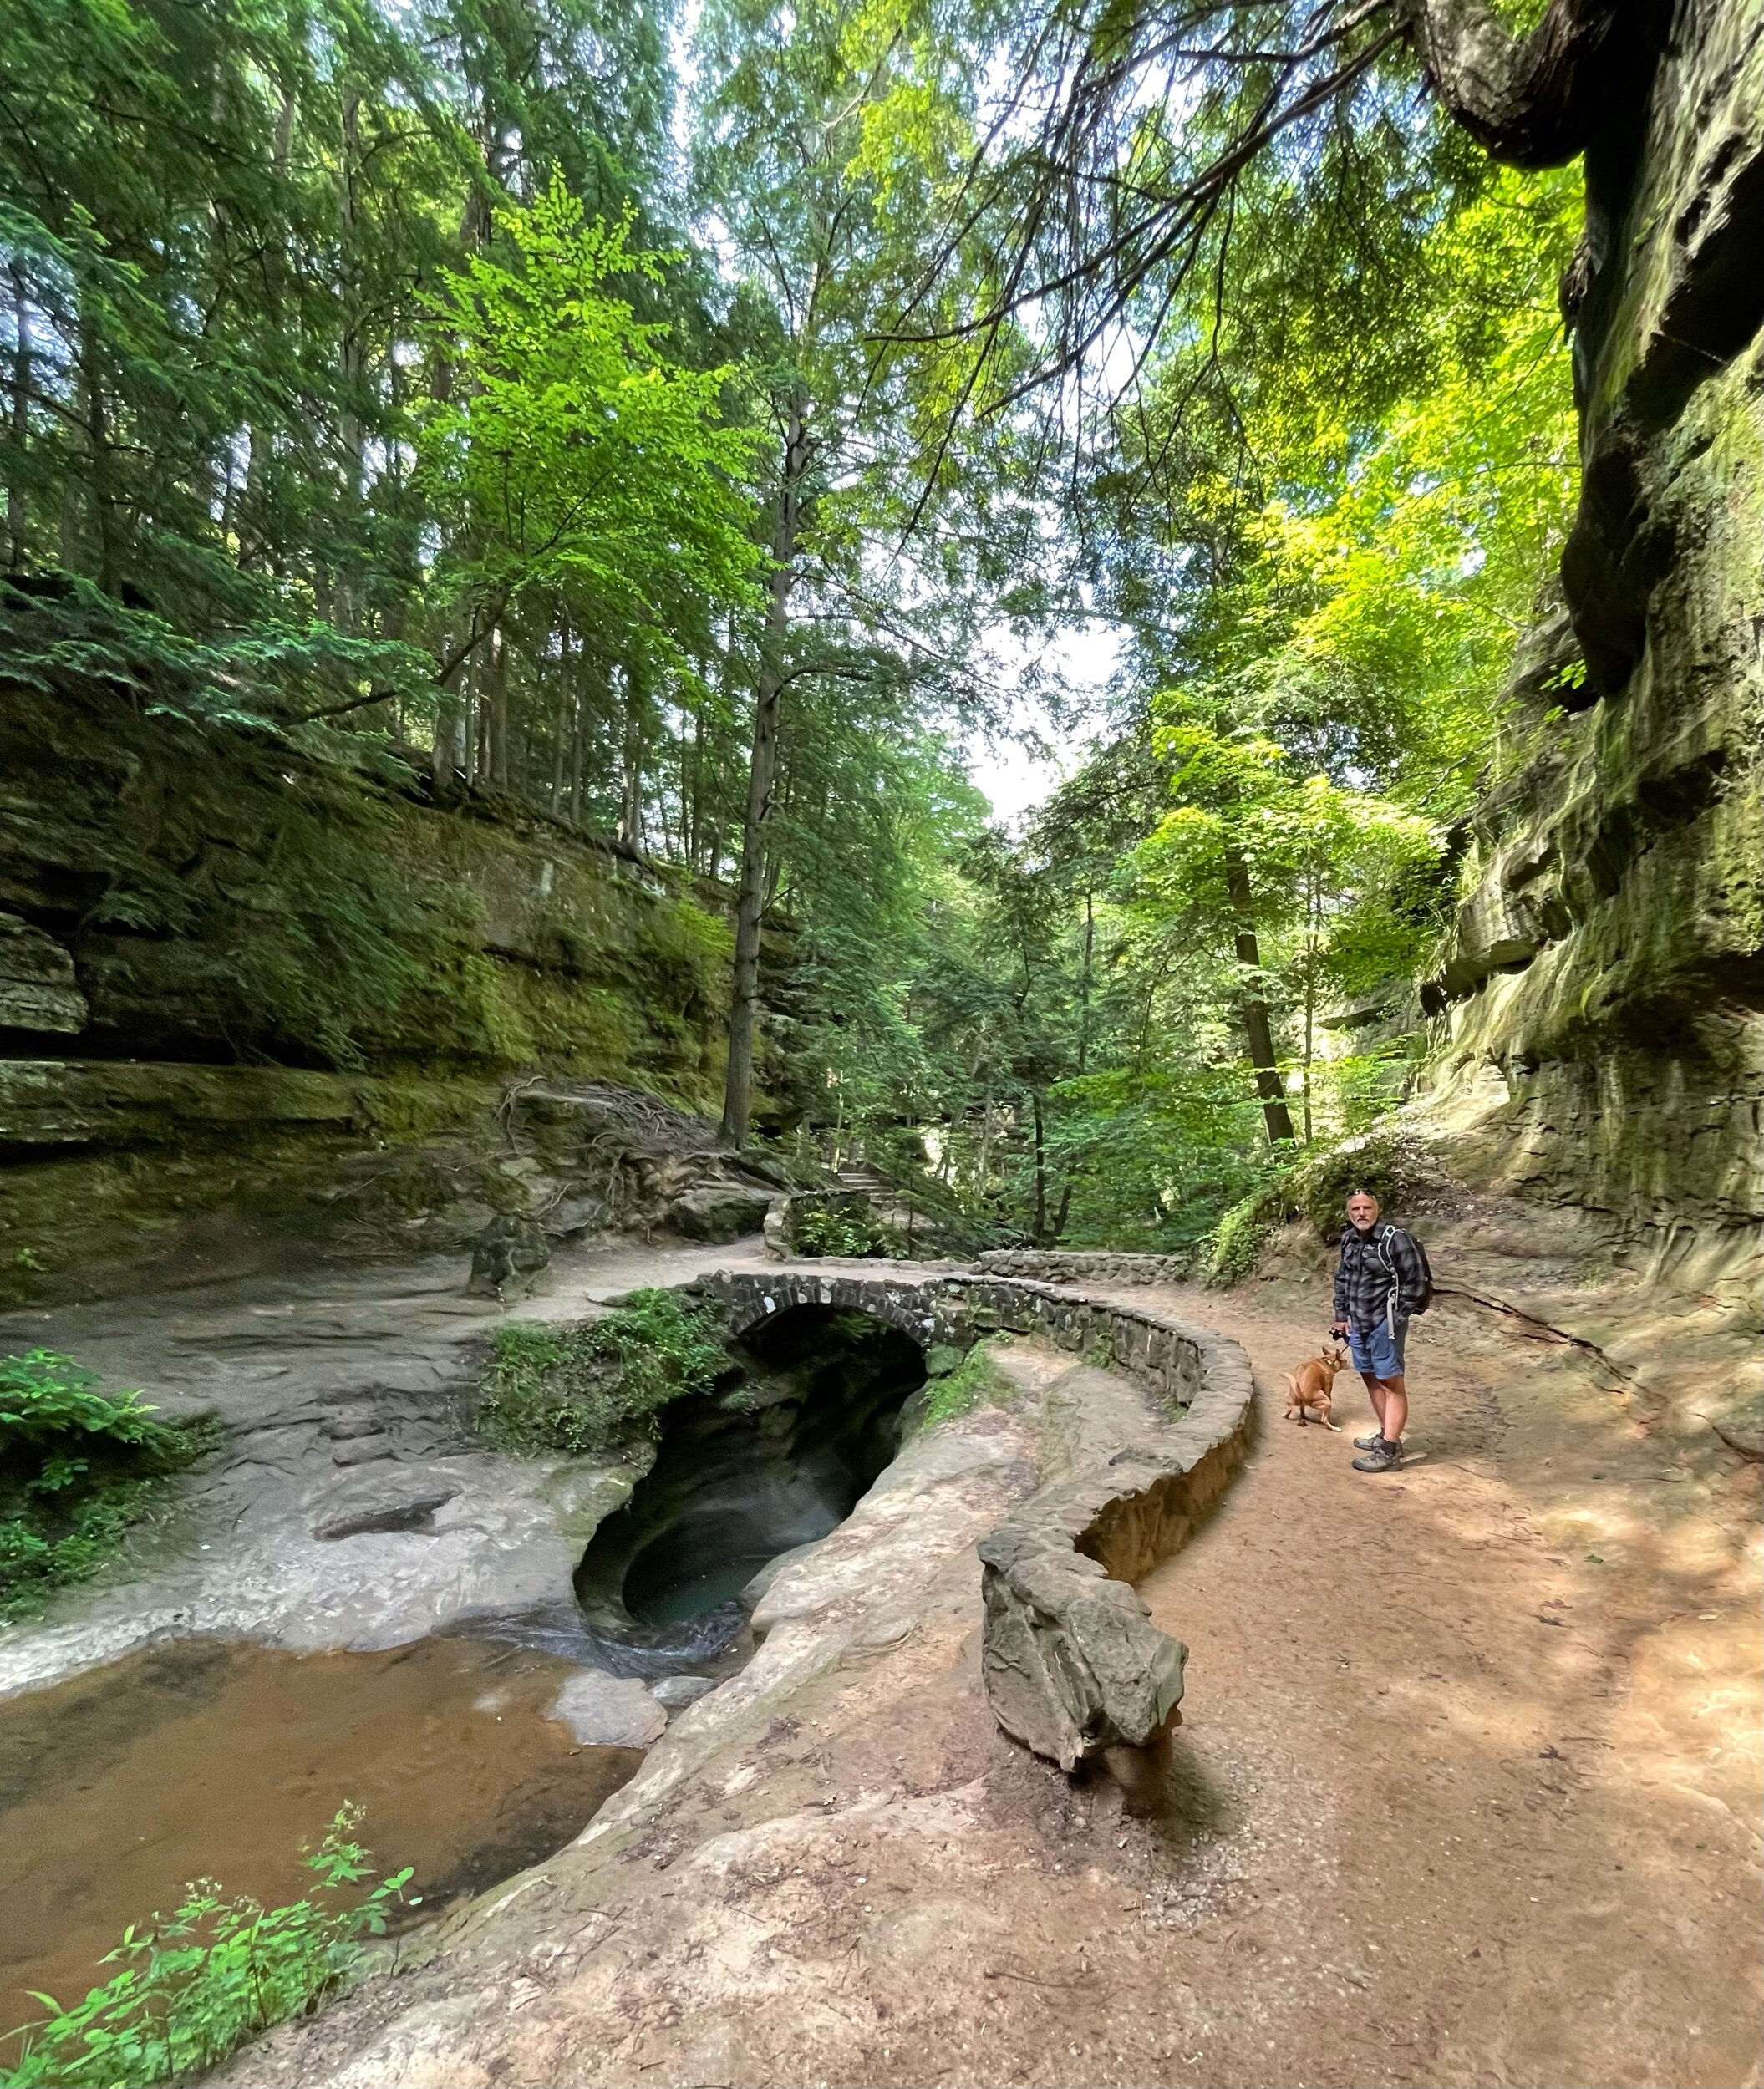   Old Man’s Cave  within  Hocking Hills State Park  is a natural formation carved into a gorge by the flow of the Salt Creek and melting glaciers. This cave gets its name from a hermit who lived under the rock shelter in the early 1800s. He lived out